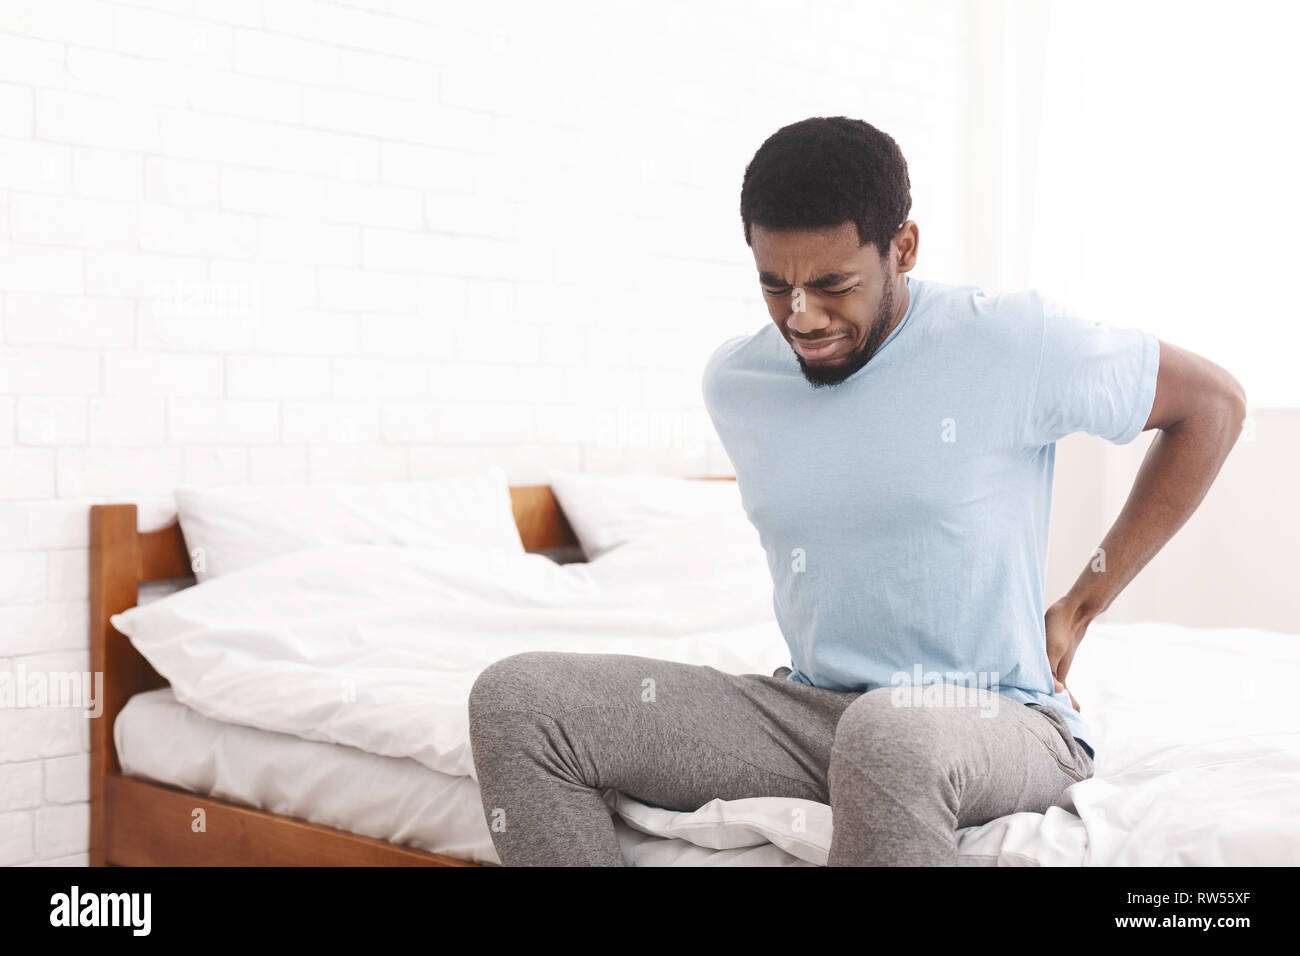 Man suffering from back pain at home in bedroom. Stock Photo